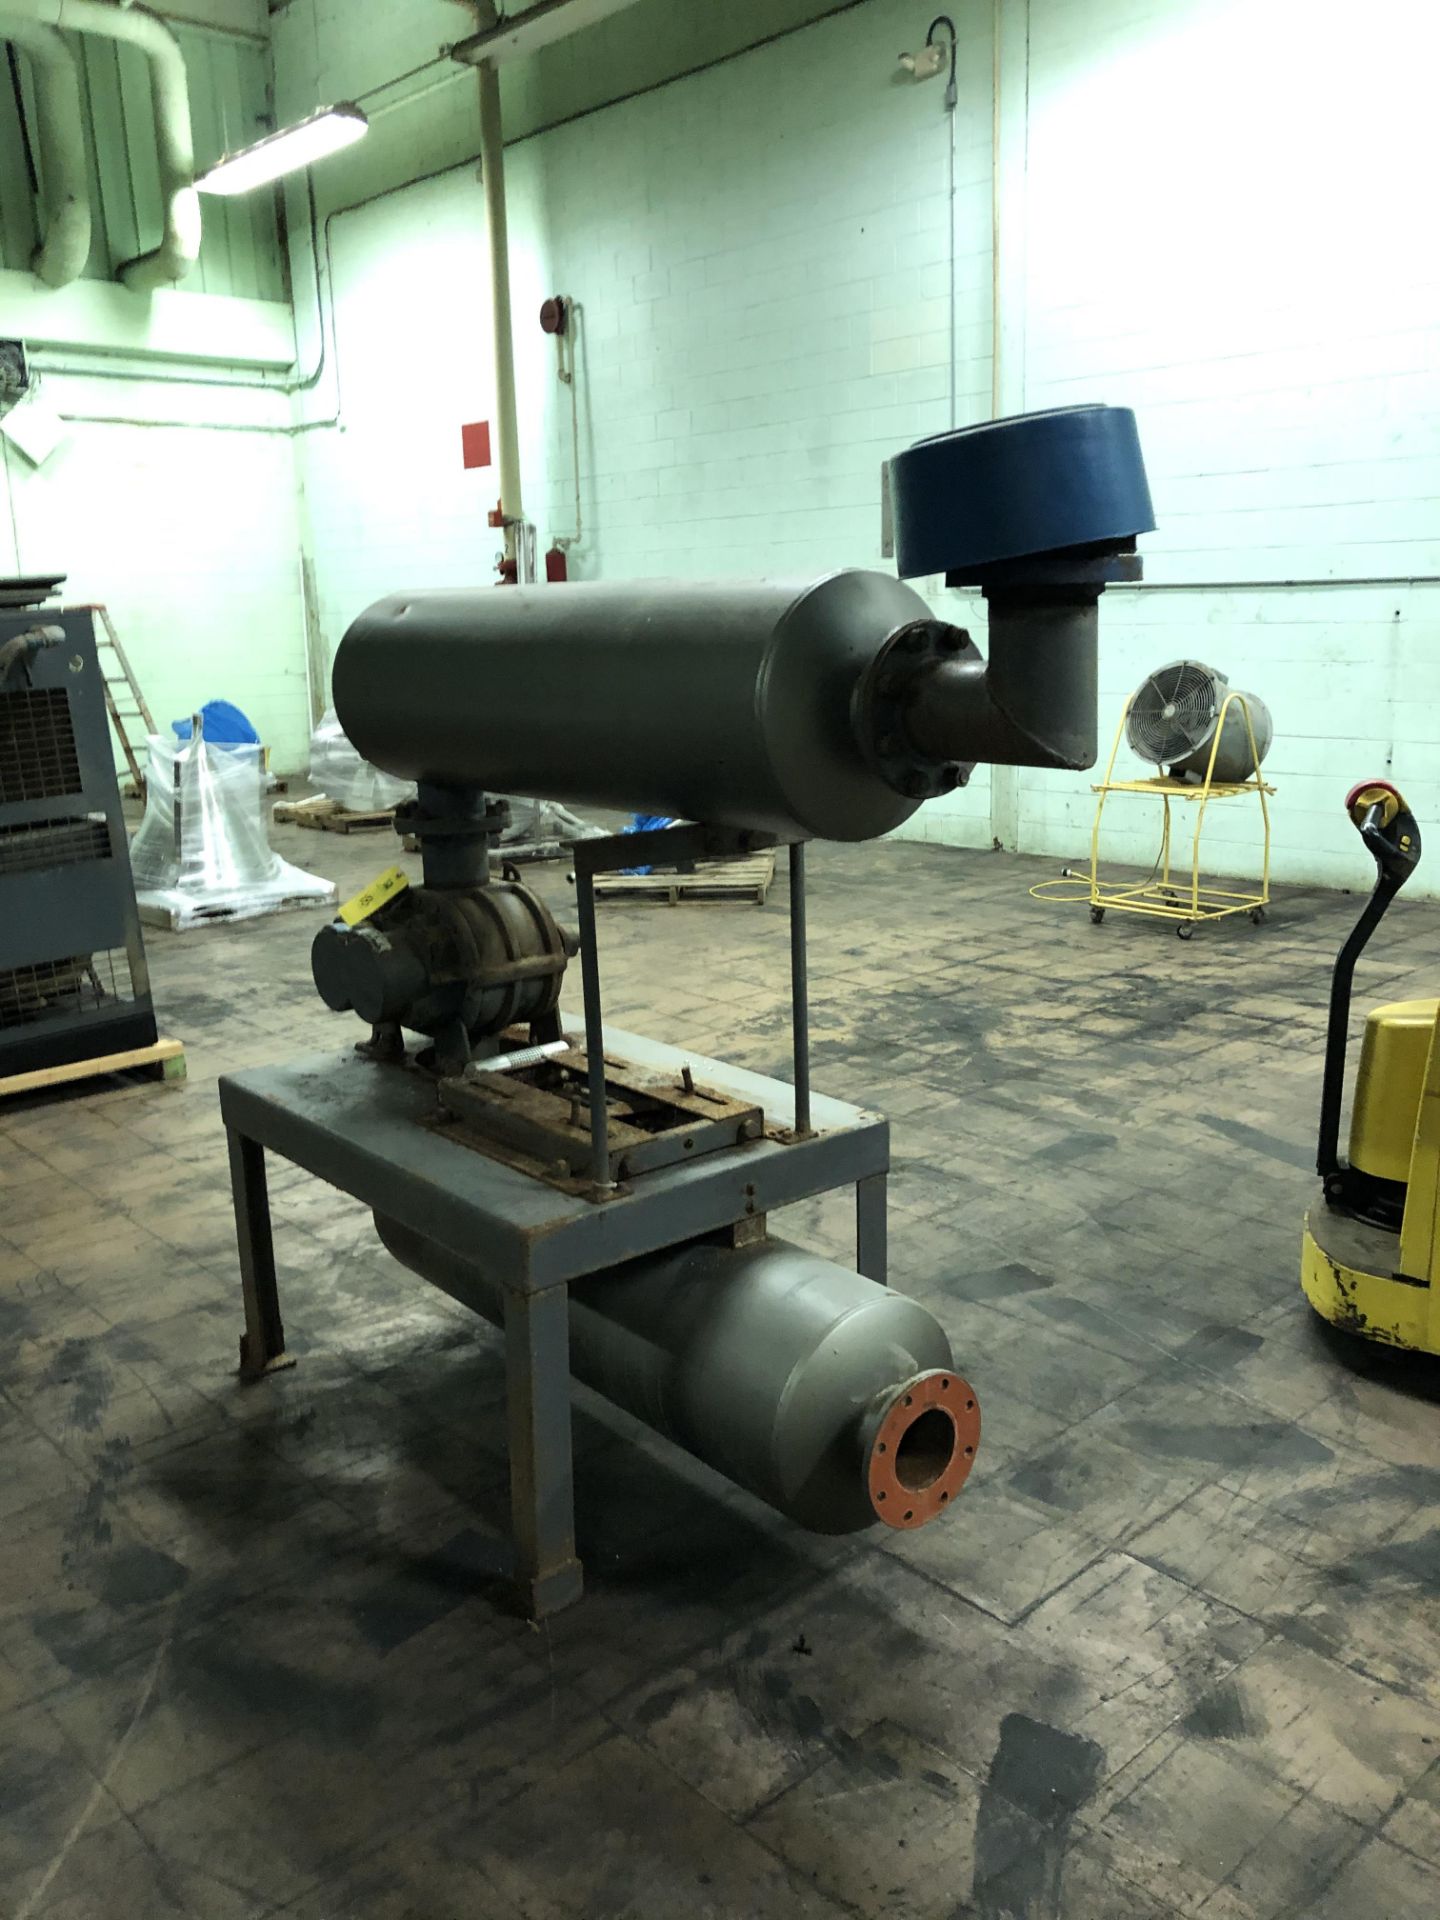 Tuthill Corp. Model #6008-21L2 Vacuum Pump, Tanks, Stand, Note - No Motor, RIGGING FEE - $150